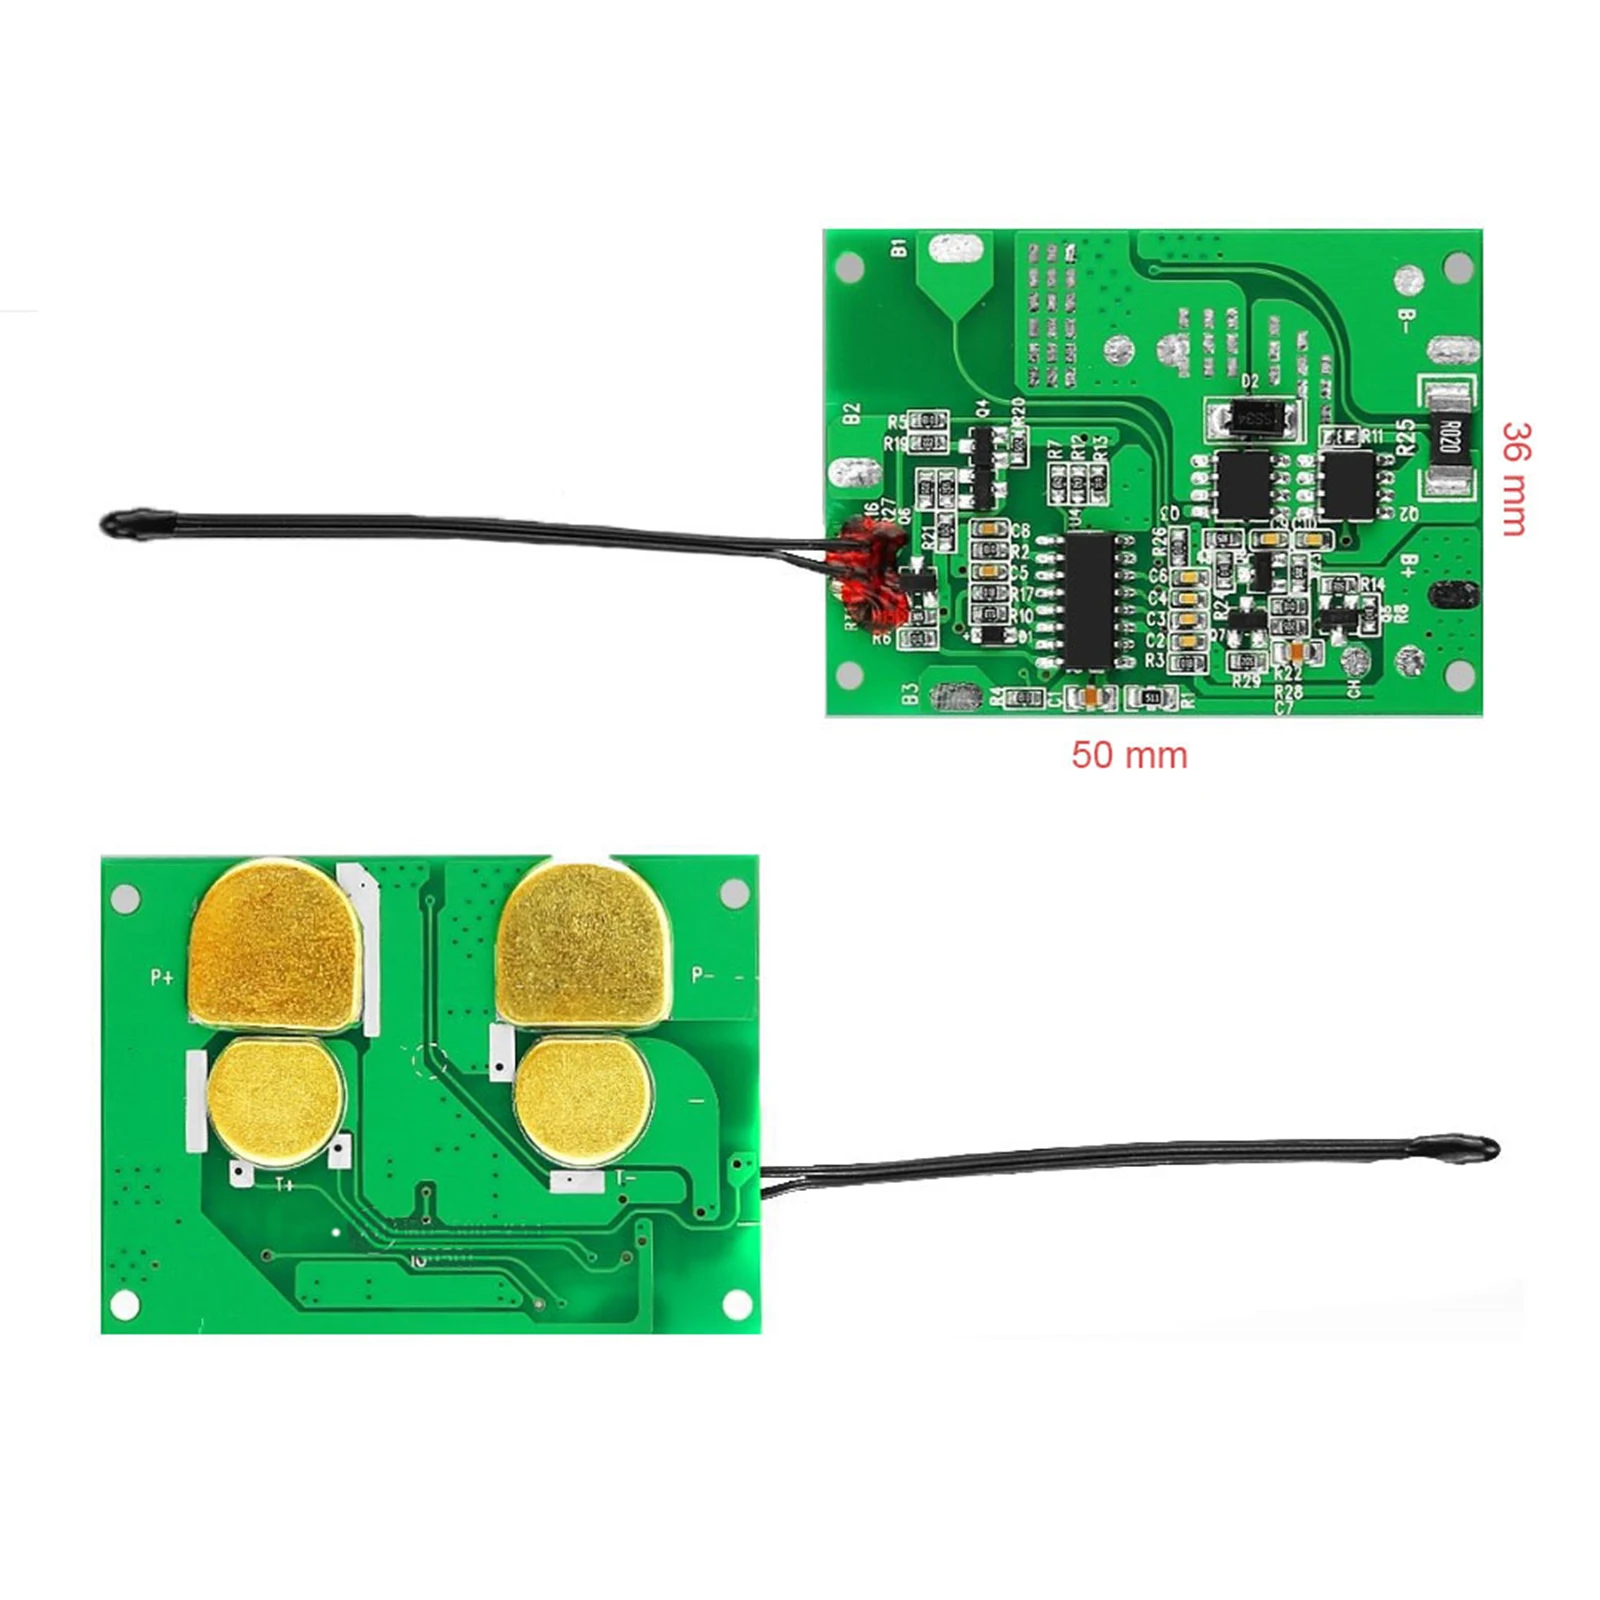 Details about   PCB Crucit Board Battery Shell Case Set for iRobot Roomba Robotic Vacuum Cleaner 